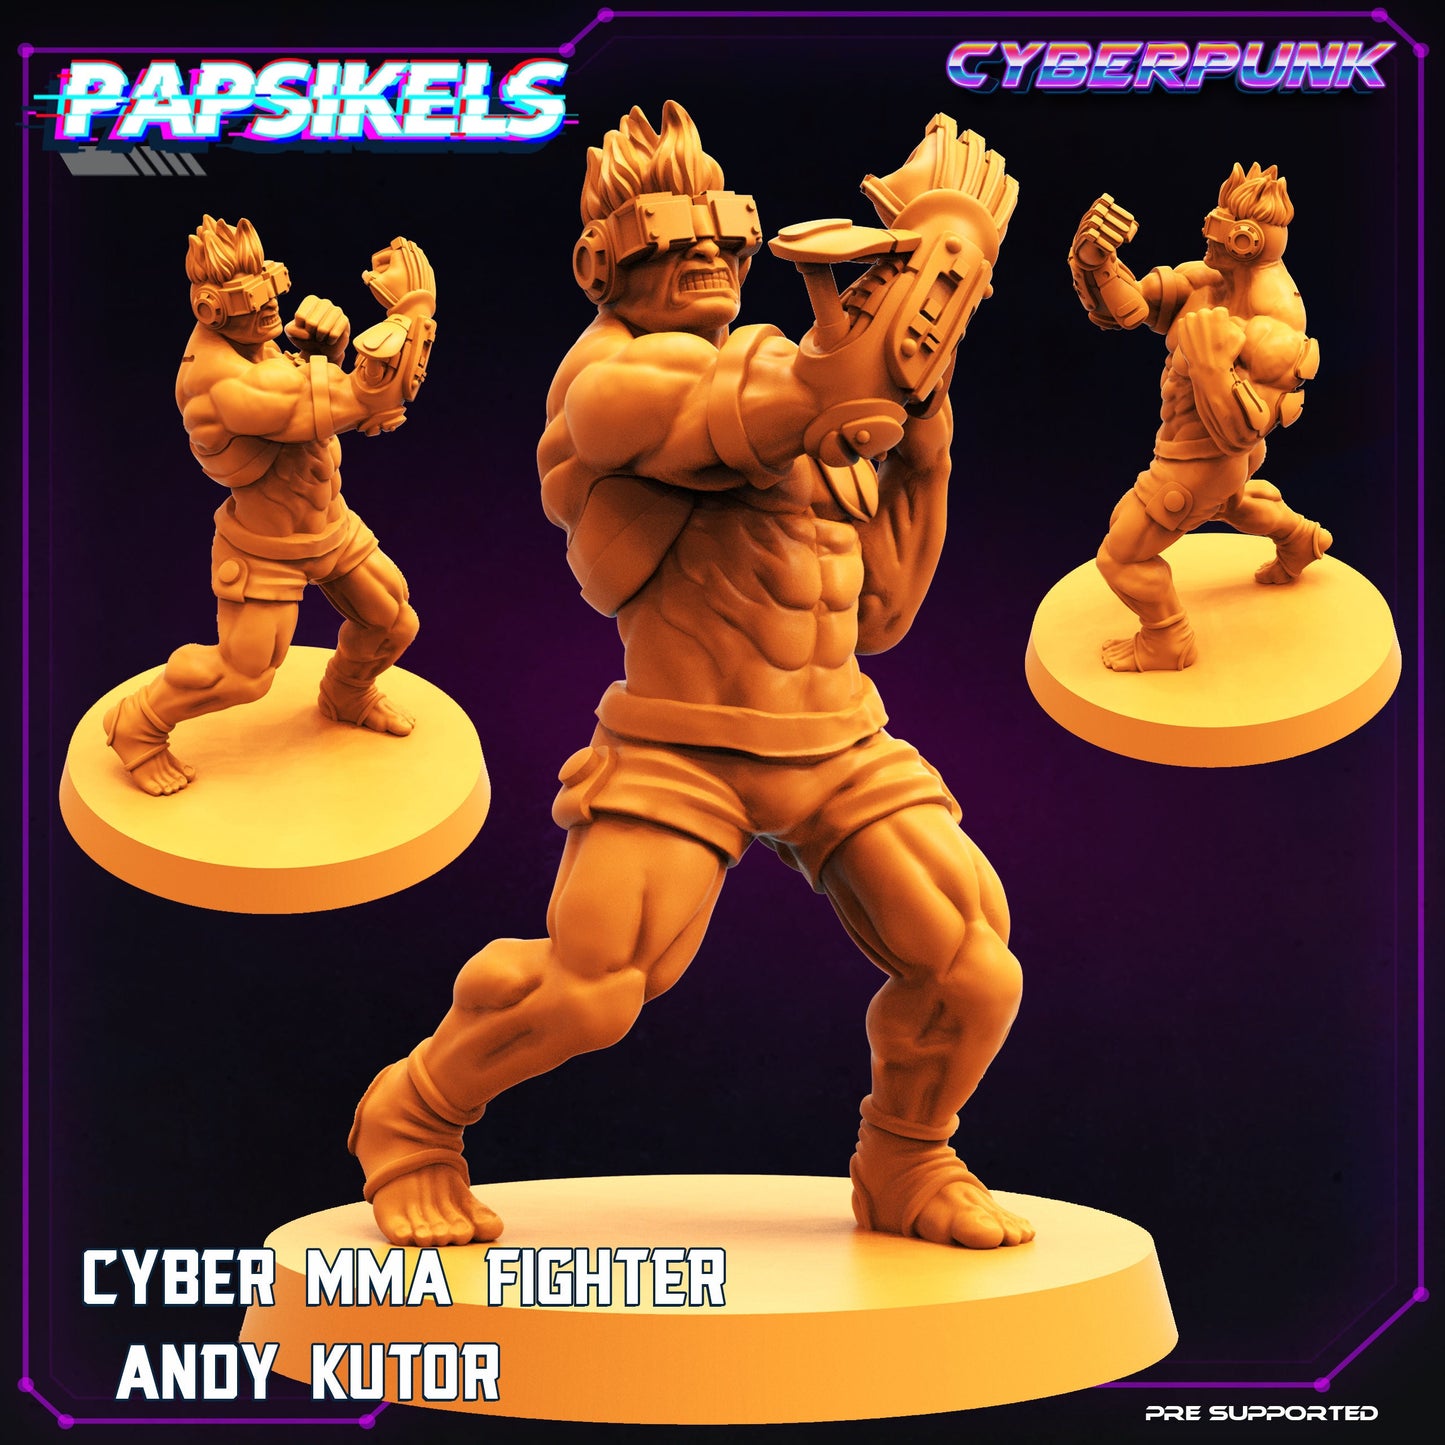 Cyber MMA Fighter - Andy Kutor (sculpted by Papsikels)